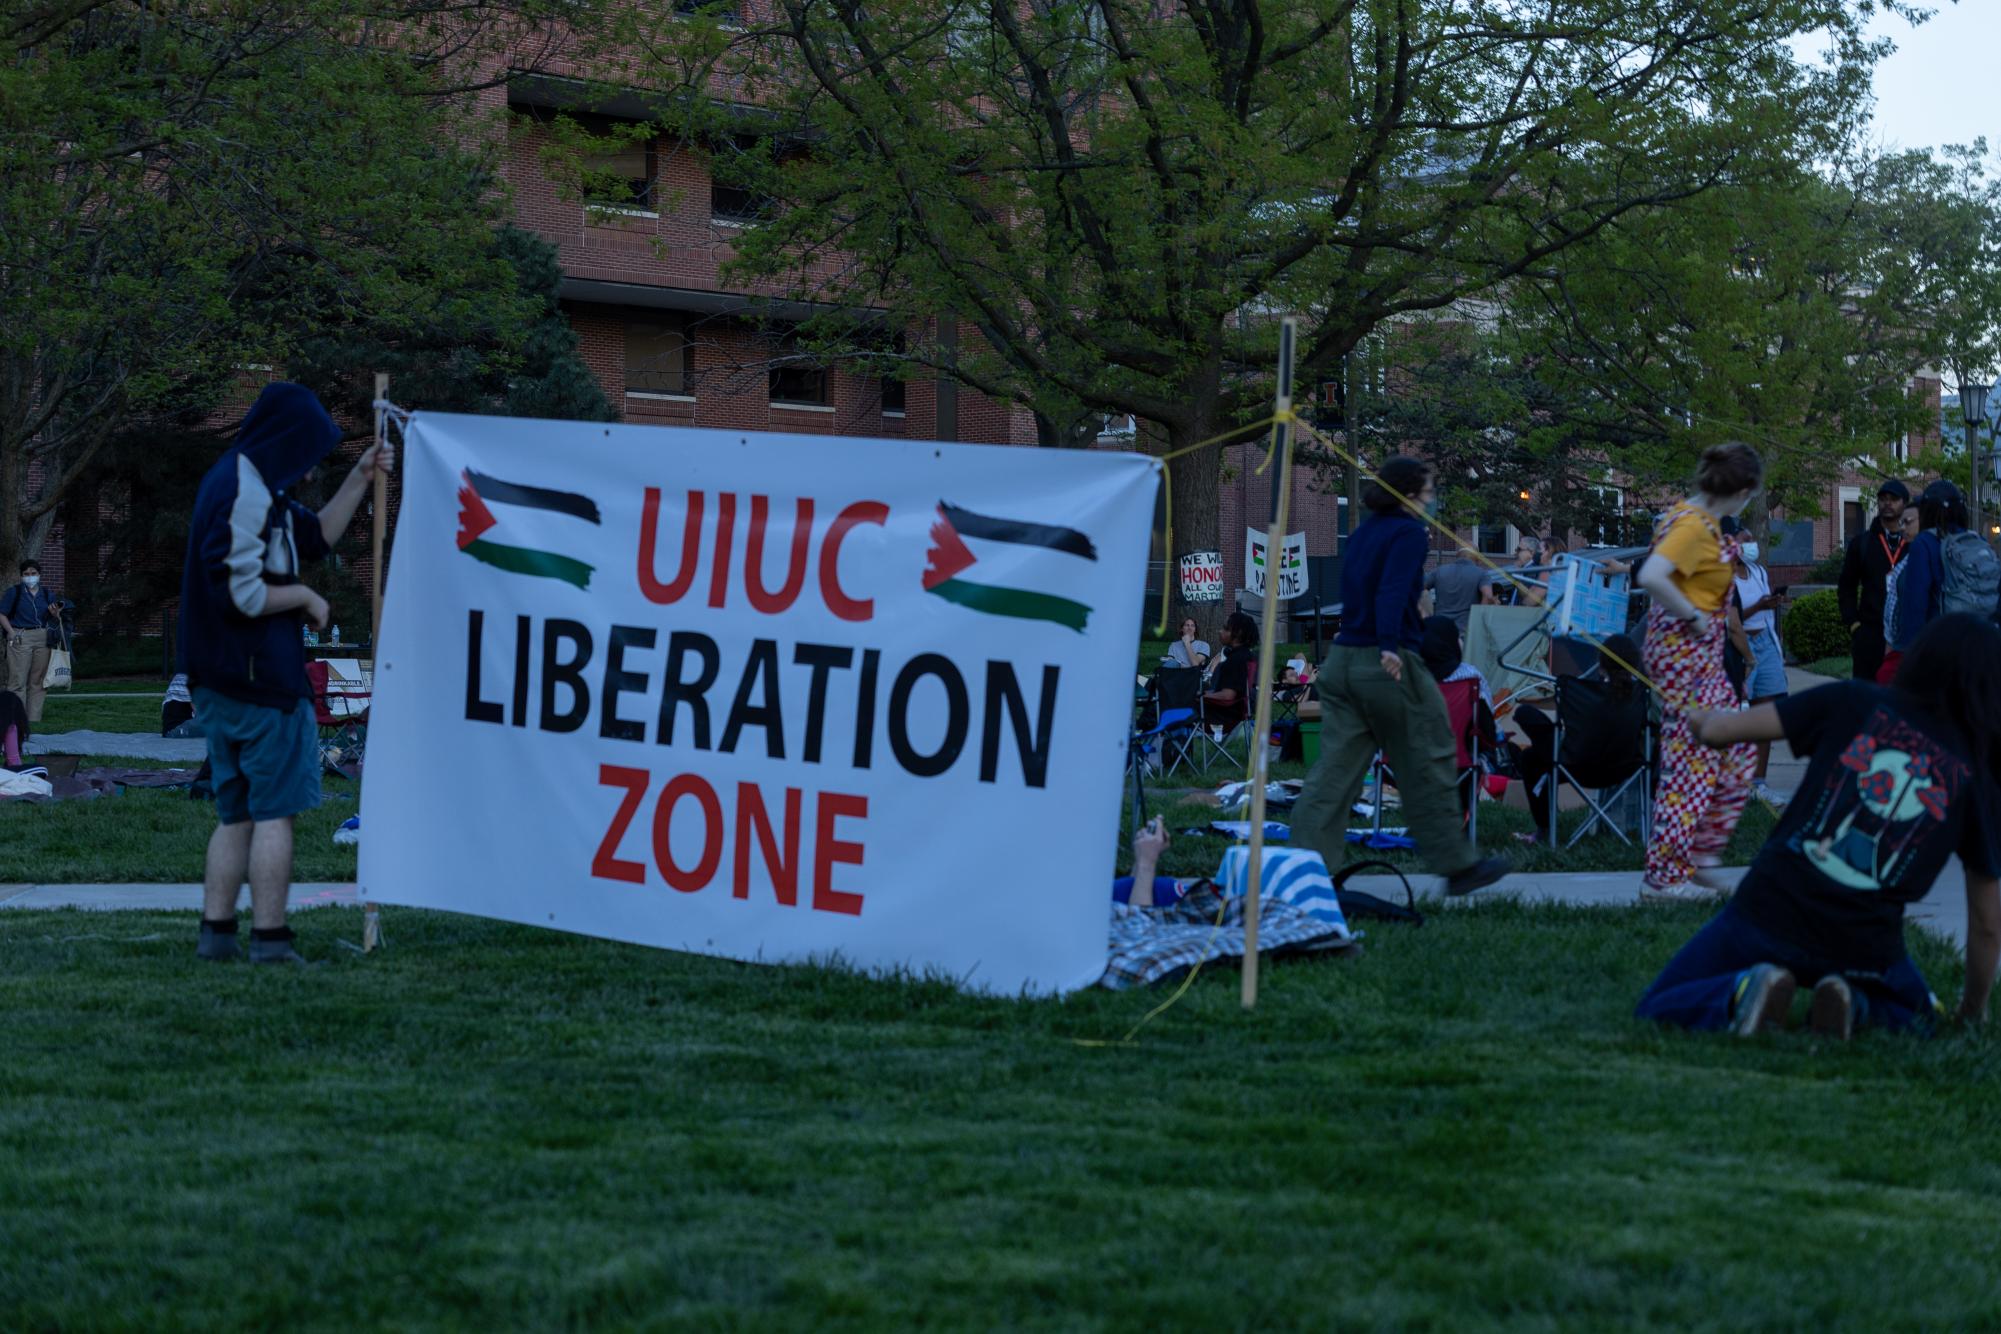 Demonstrators moving the “UIUC Liberation Zone” sign.